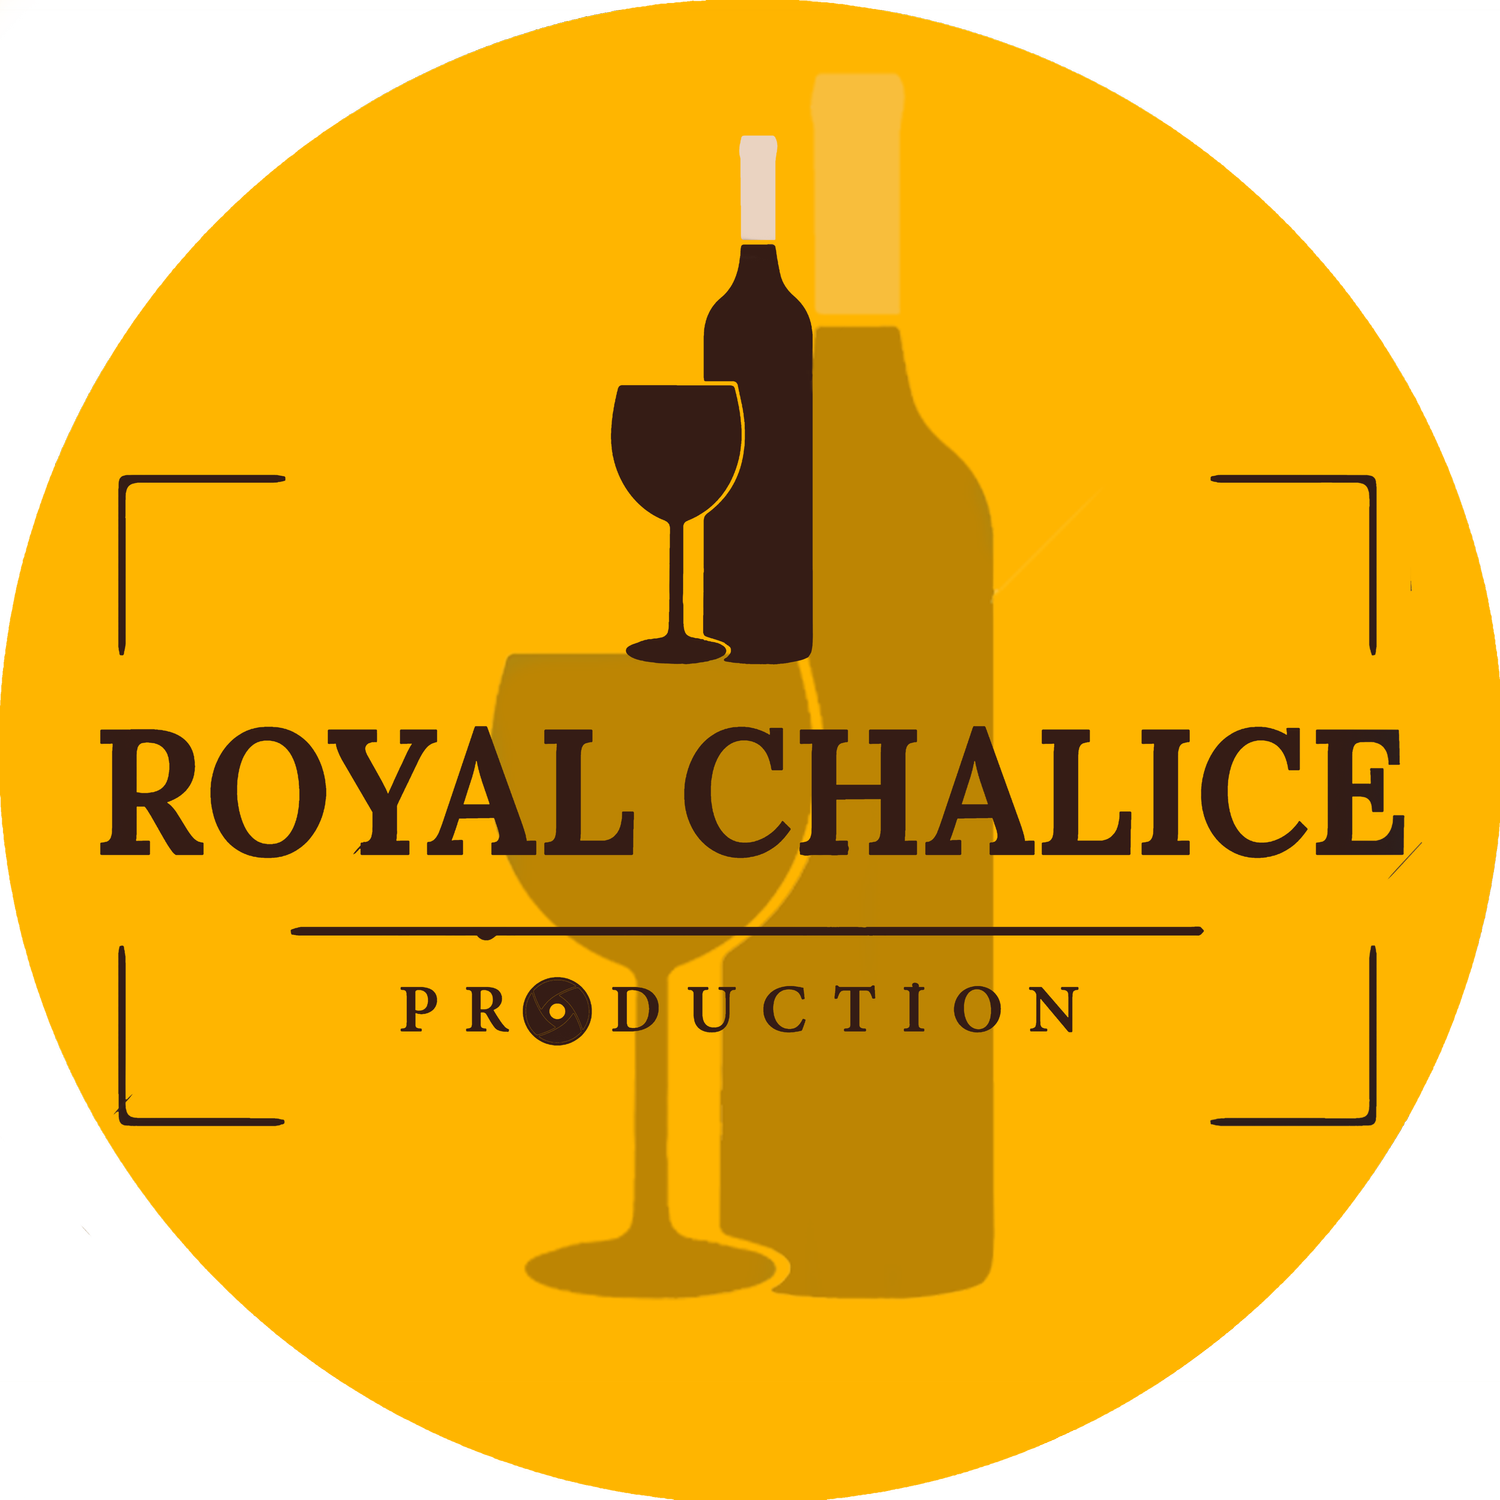 Royal Chalice Production